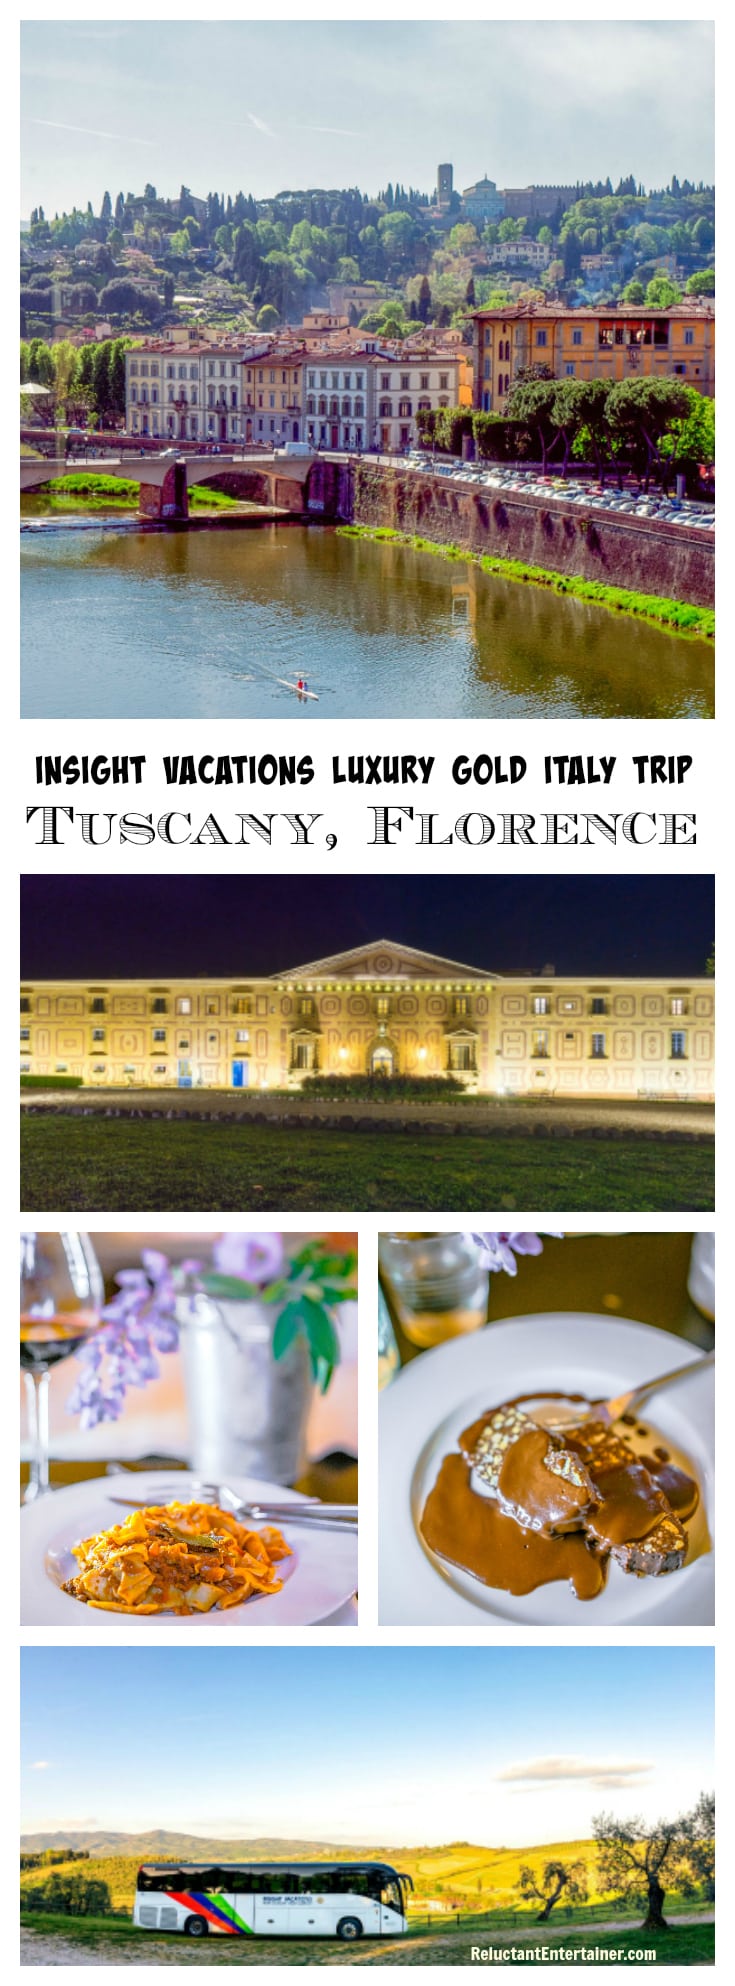 Insight Vacations Luxury Gold Trip: Tuscany, Florence